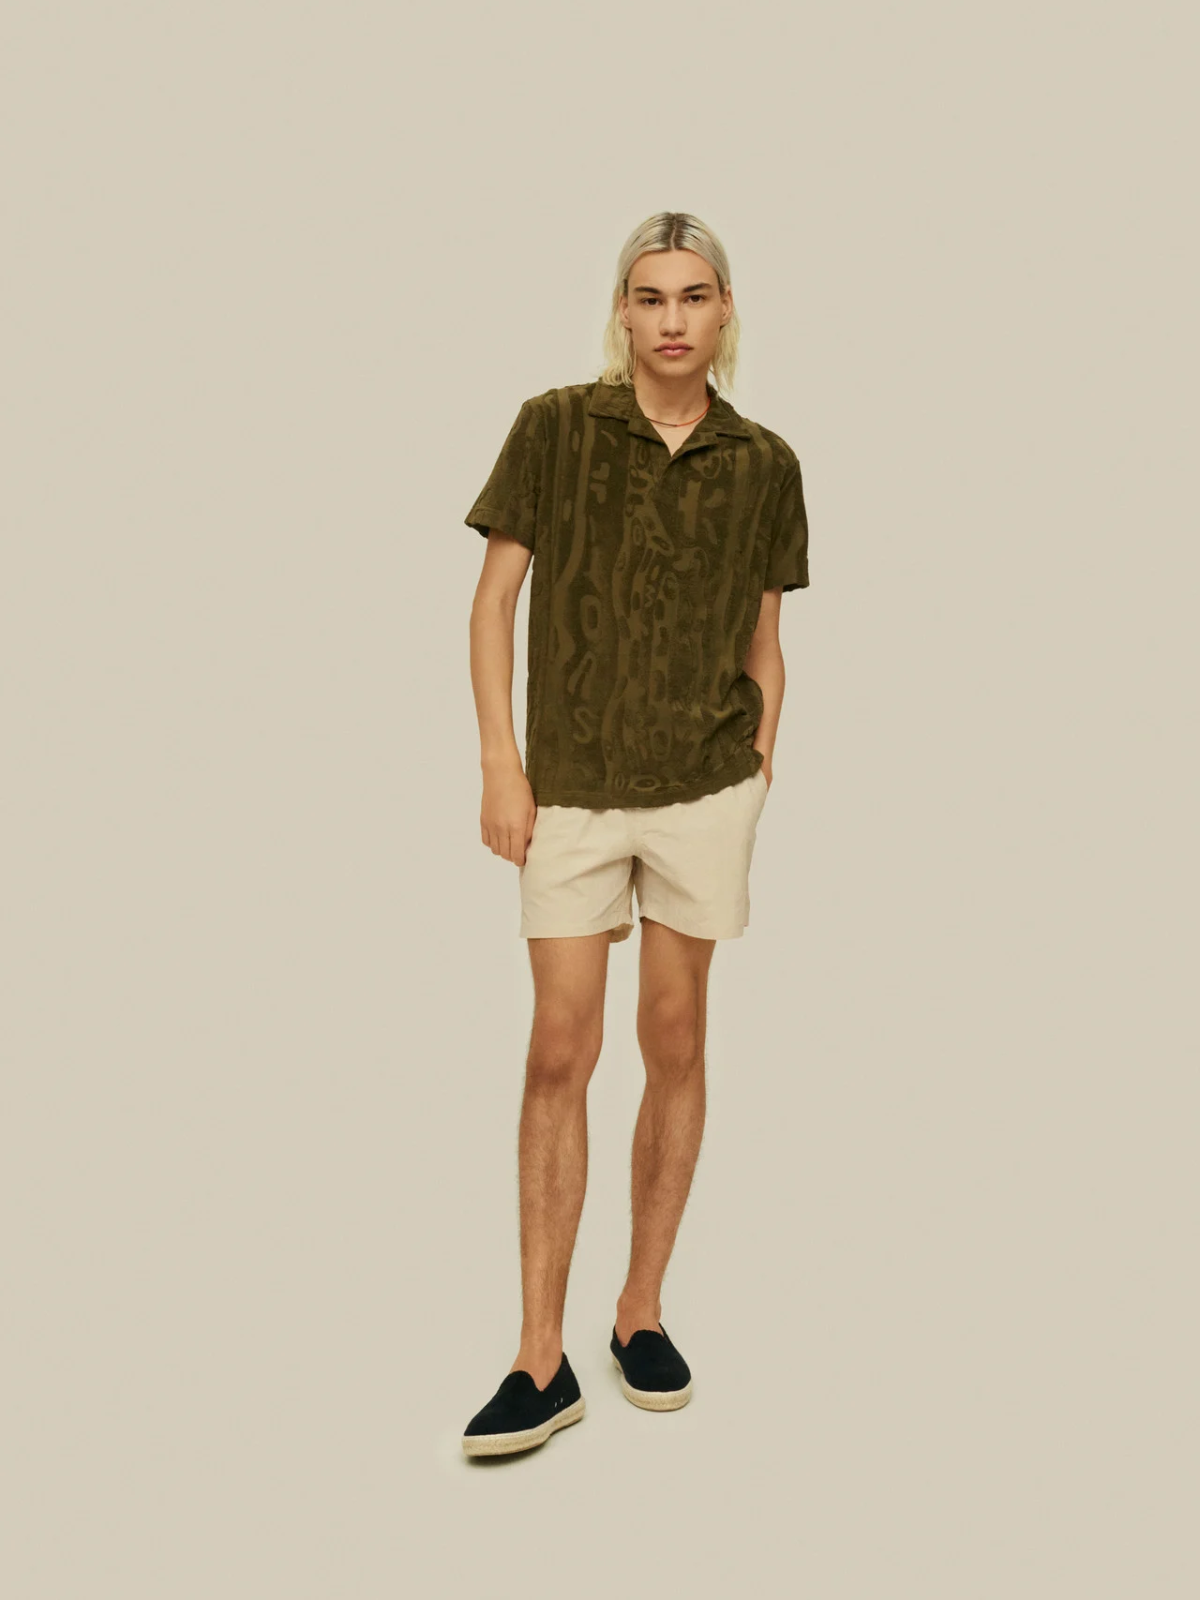 oas jiggle terry polo olive green ss short sleeve cotton polyester blend kempt athens ga georgia men's clothing store